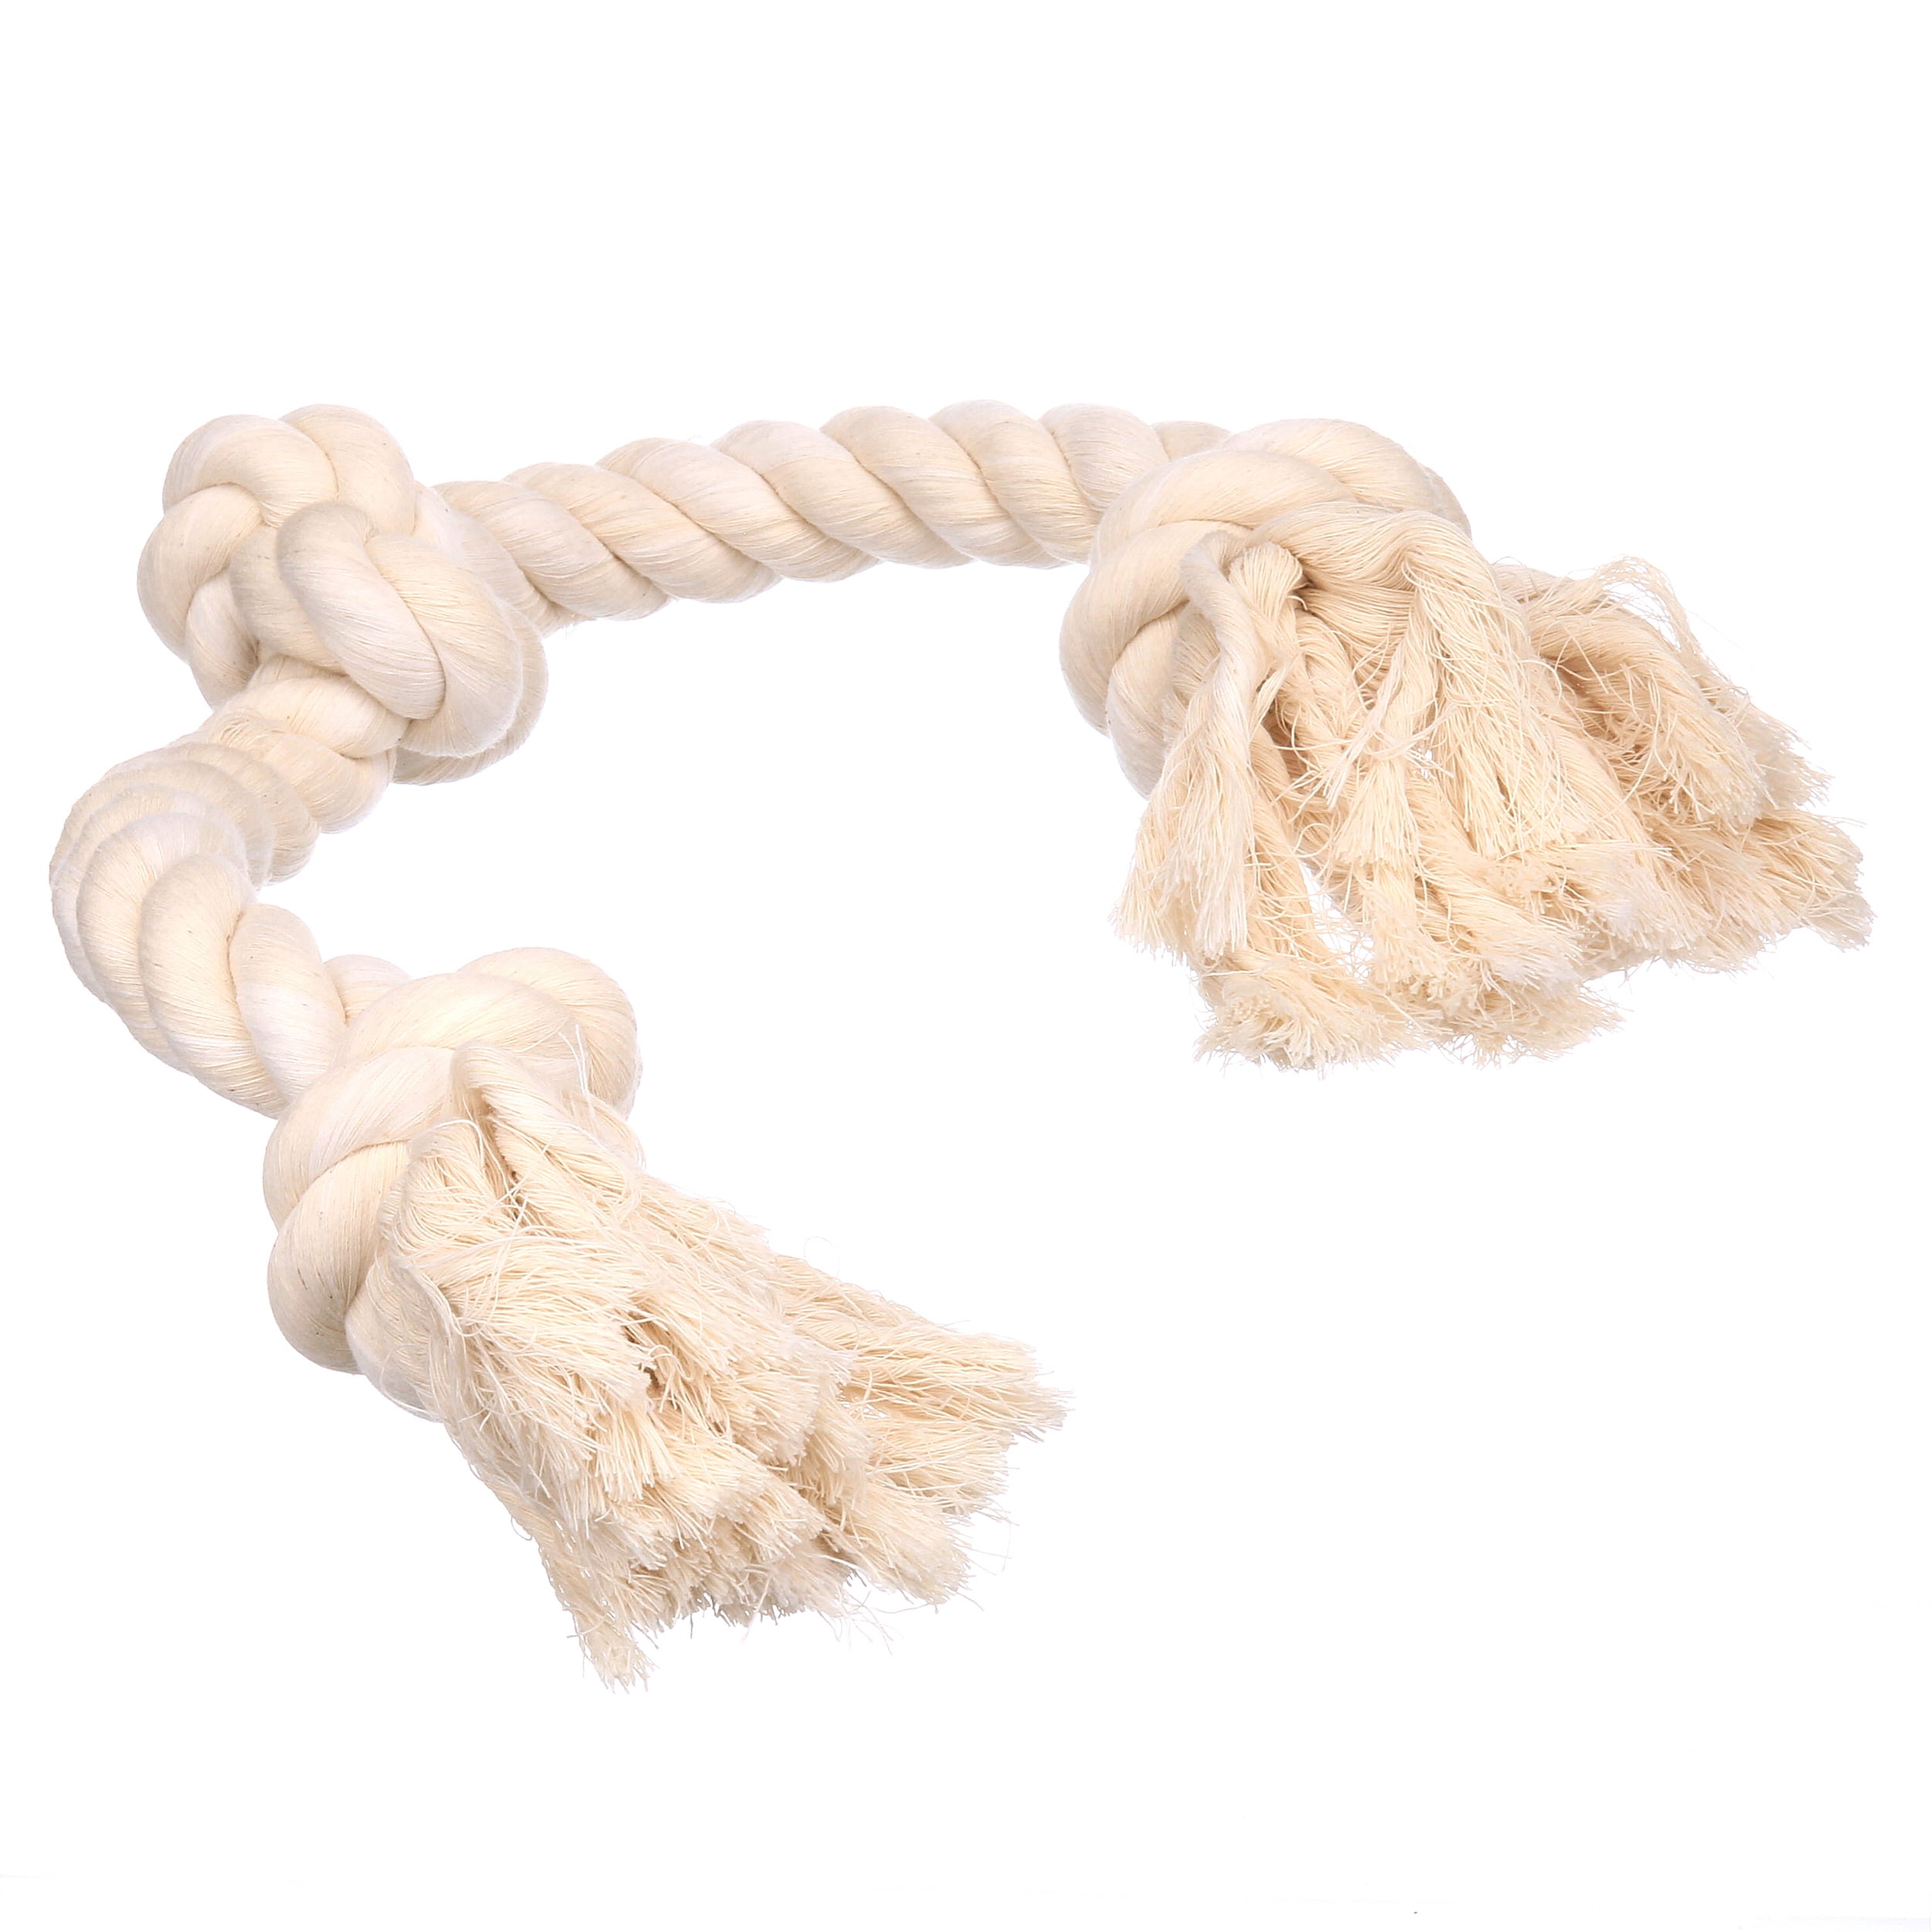 Dogs Love Our Large Cotton Tug! - Organic Cotton Tug Toy - Hand braided  plastic free tug - Sturdy and washable - Great for interactive play